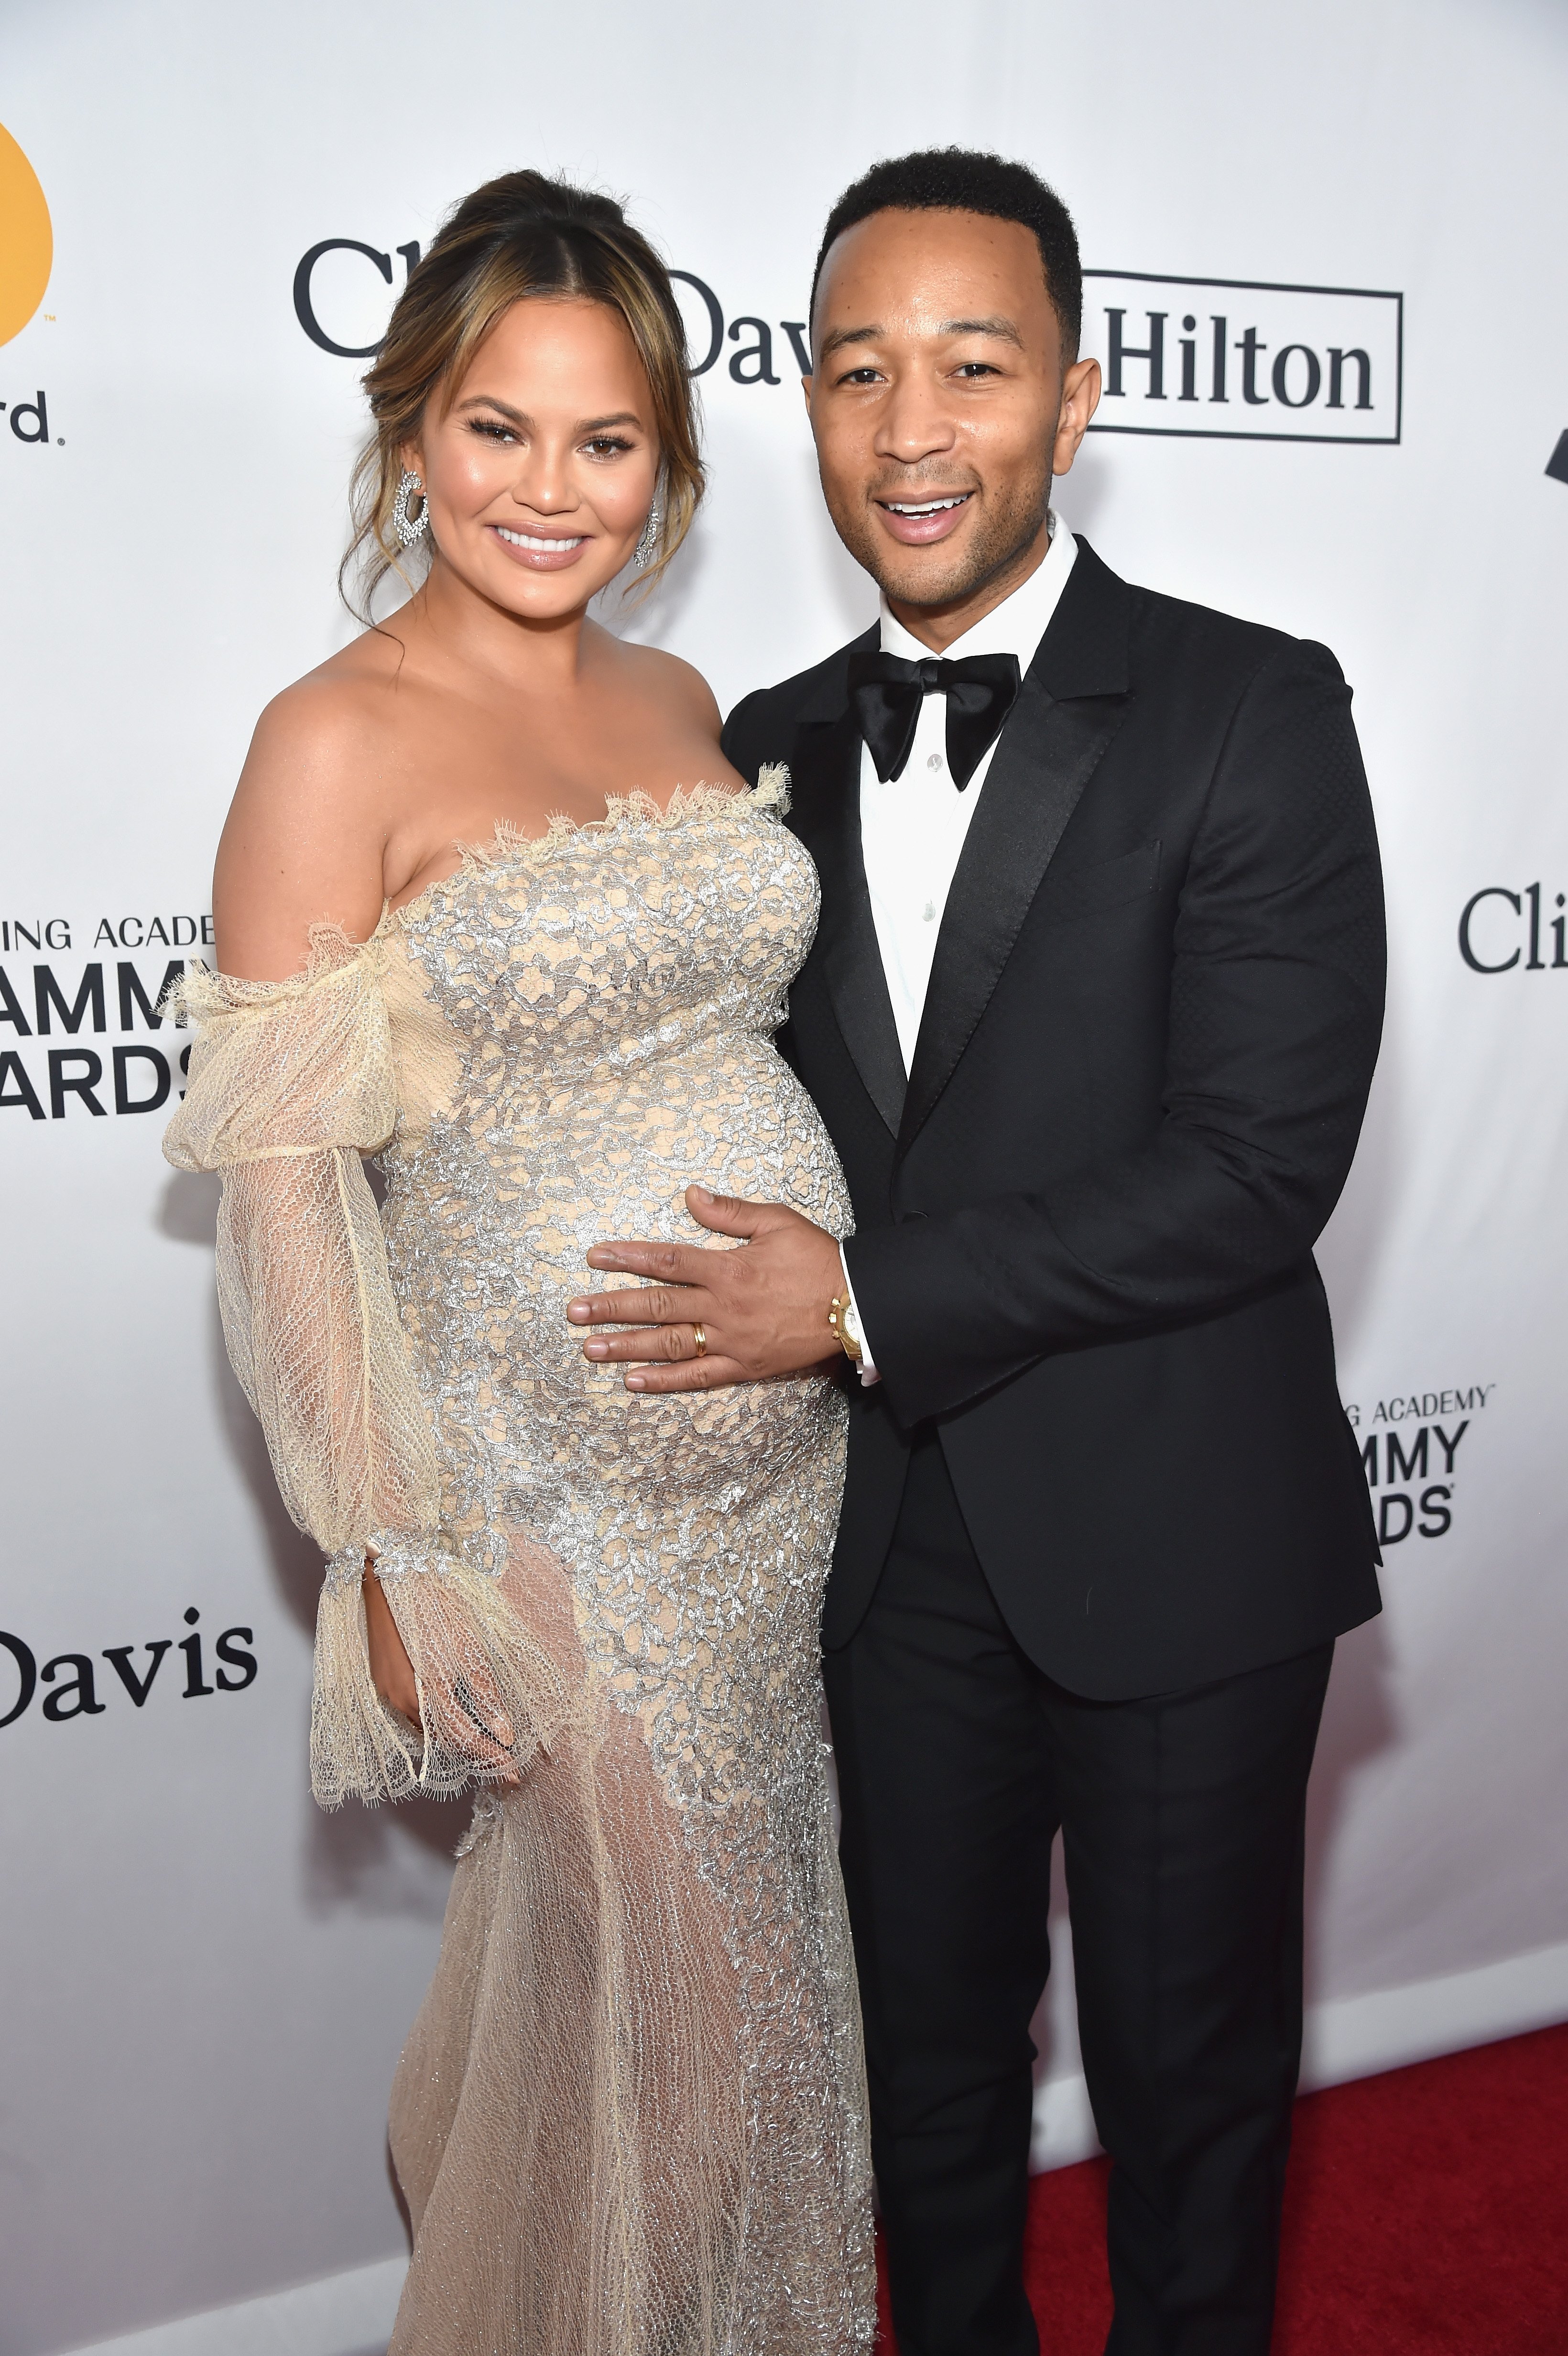 Chrissy Teigen and John Legend attend the Clive Davis and Recording Academy Pre-GRAMMY Gala and GRAMMY Salute to Industry Icons Honoring Jay-Z on January 27, 2018 in New York City | Source: Getty Images